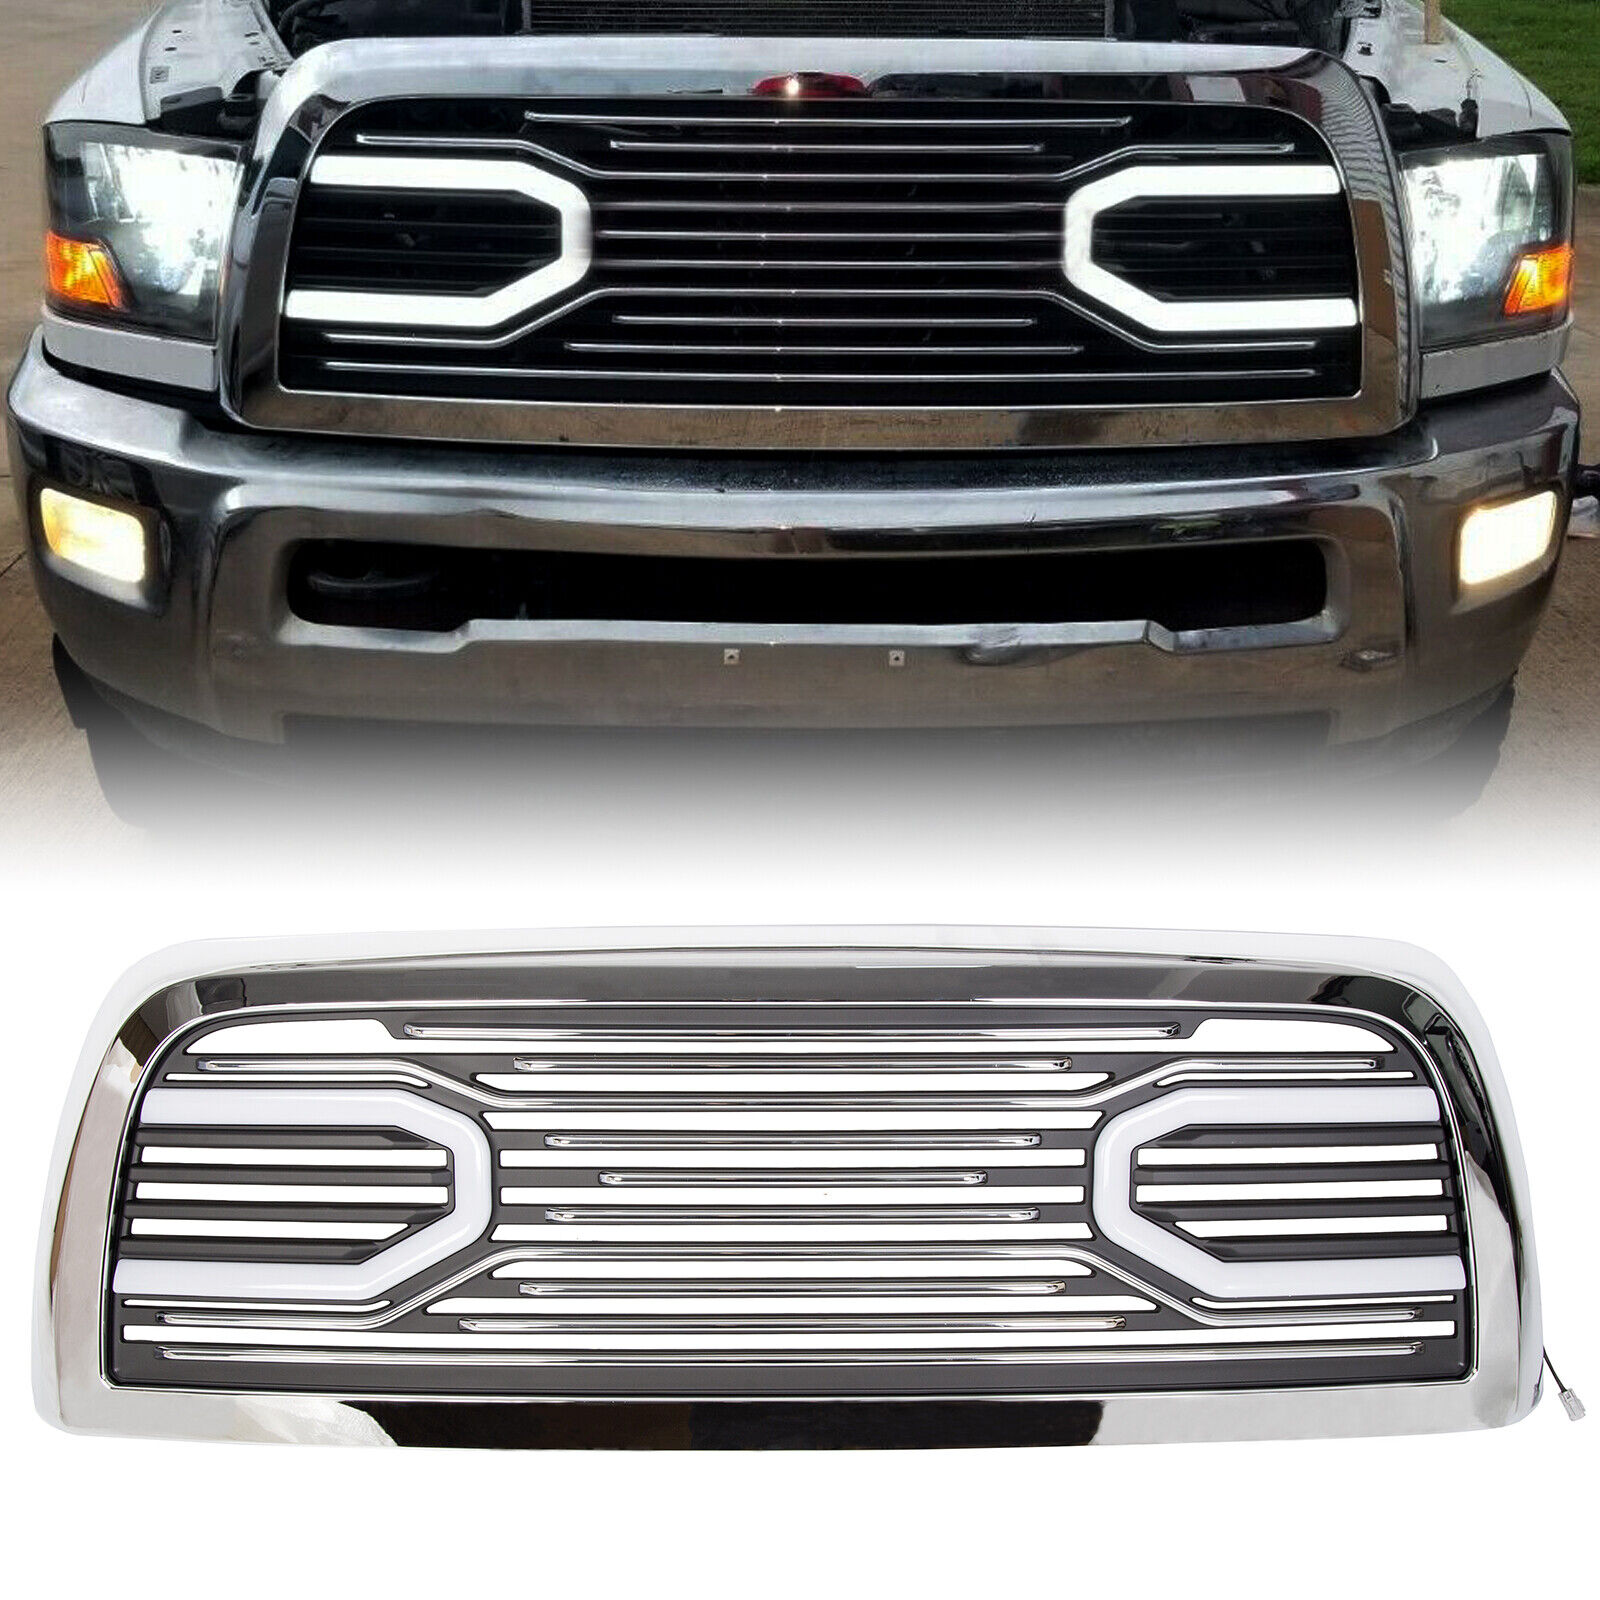 For 10-18 Dodge Ram 2500 3500 Big Horn Chrome Grille &Replacement Shell & Lights